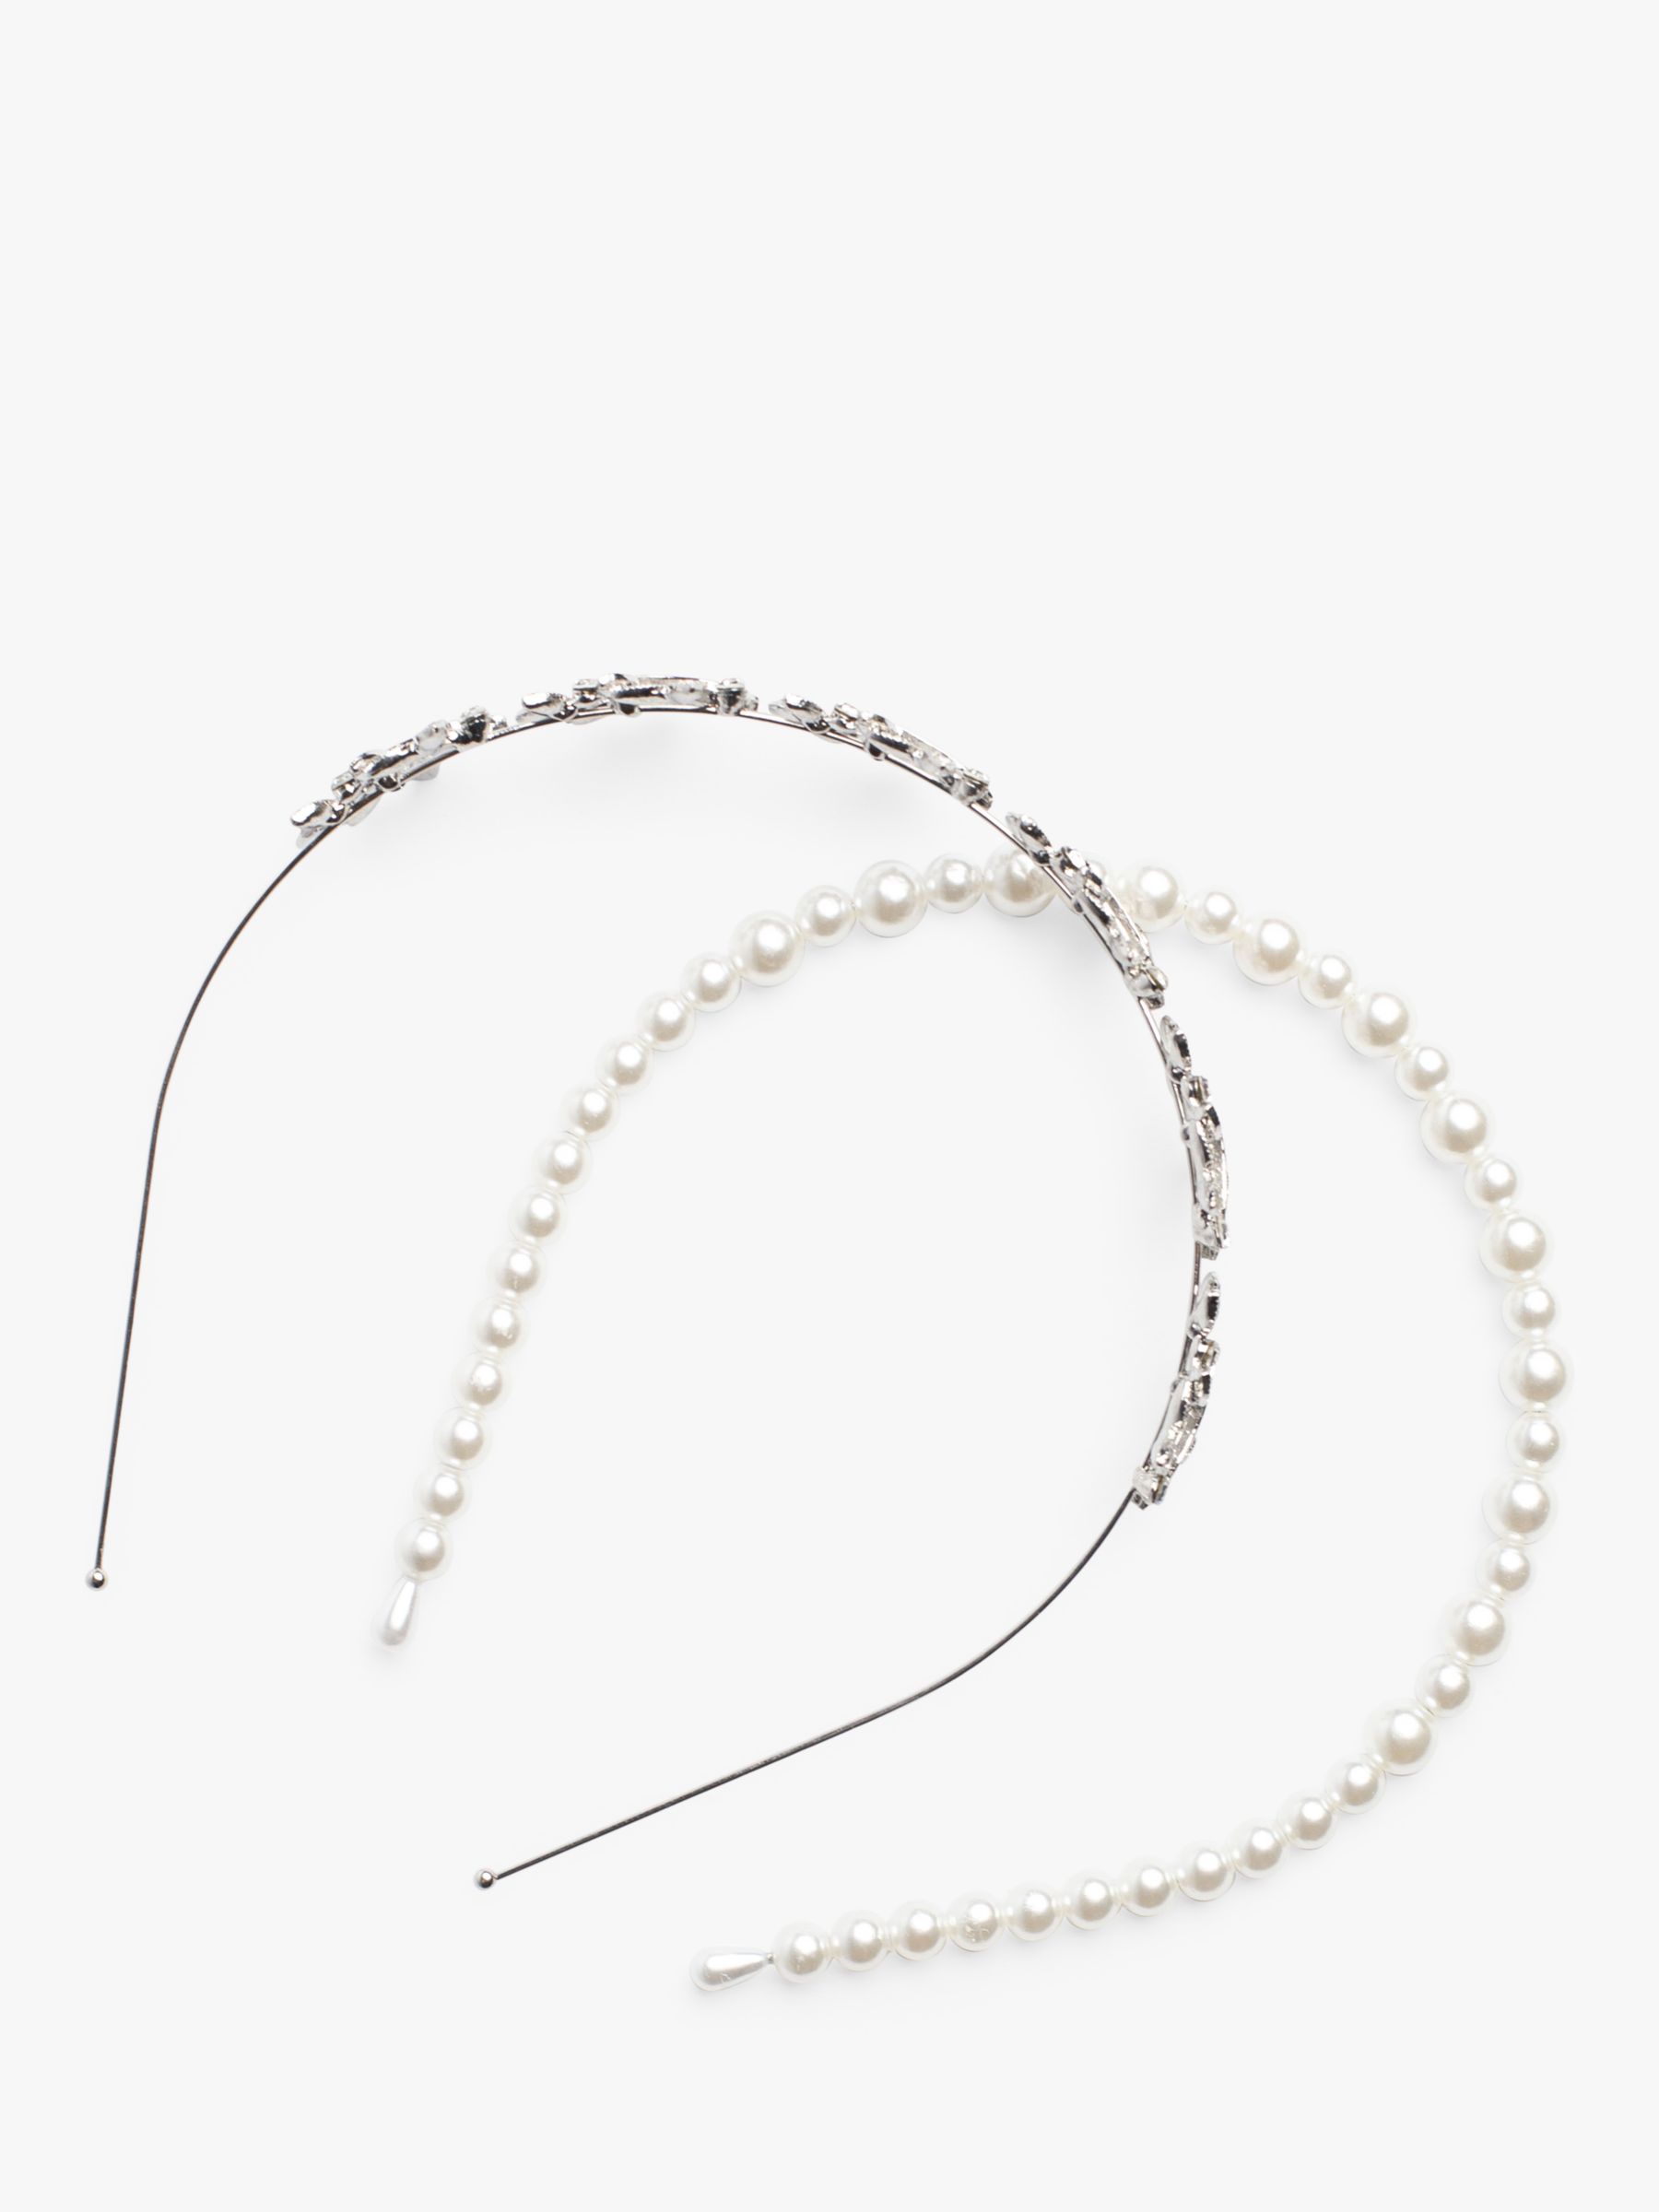 Bloom & Bay Cherry Pearl & Crystal Headband Set, Silver/White, One Size